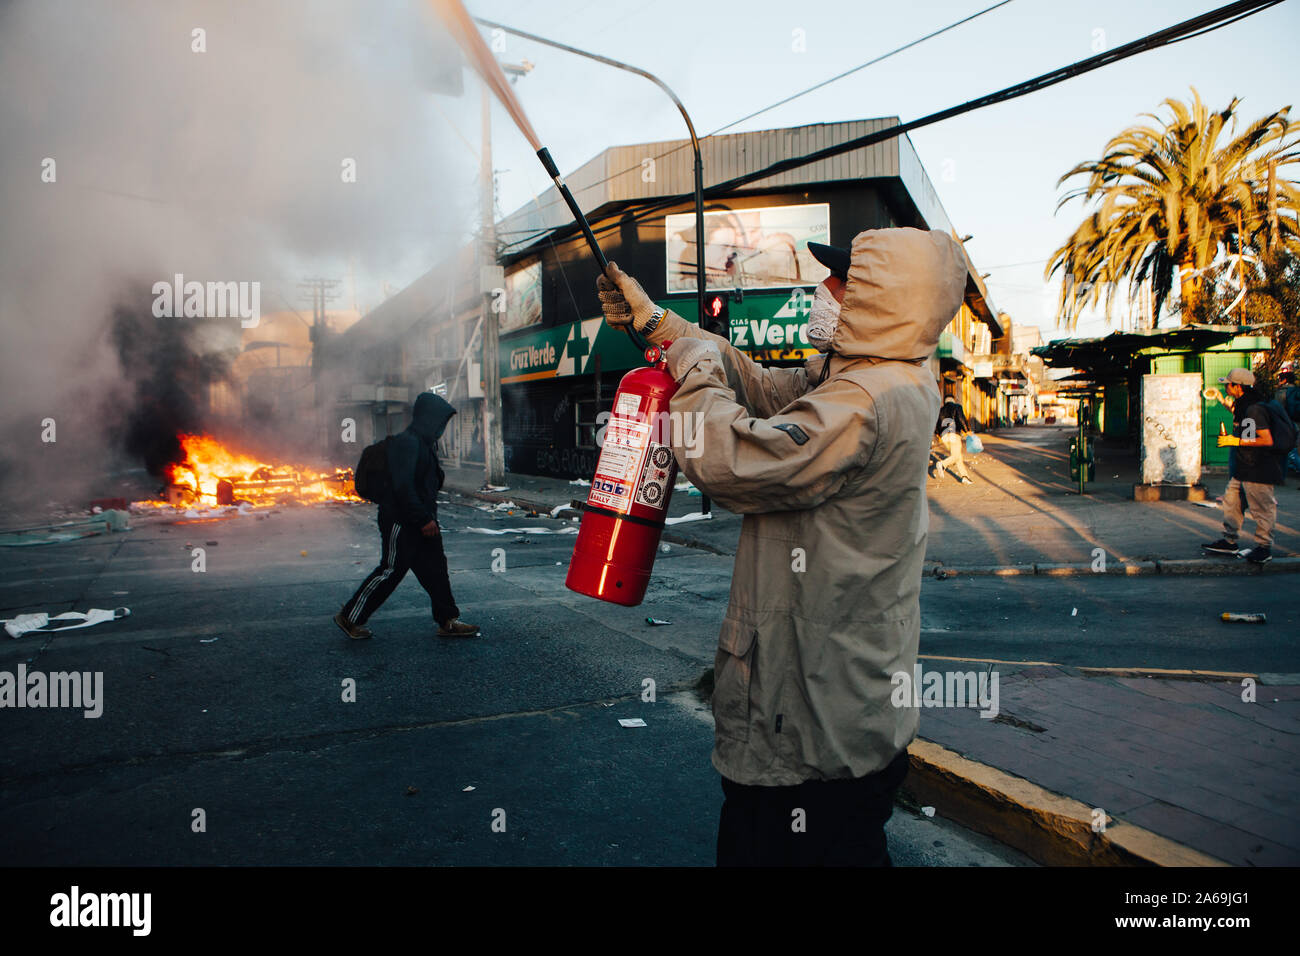 QUILPUE, CHILE - OCTOBER 20, 2019 - Barricades during protests of the 'Evade' movement against the government of Sebastian Pinera Stock Photo